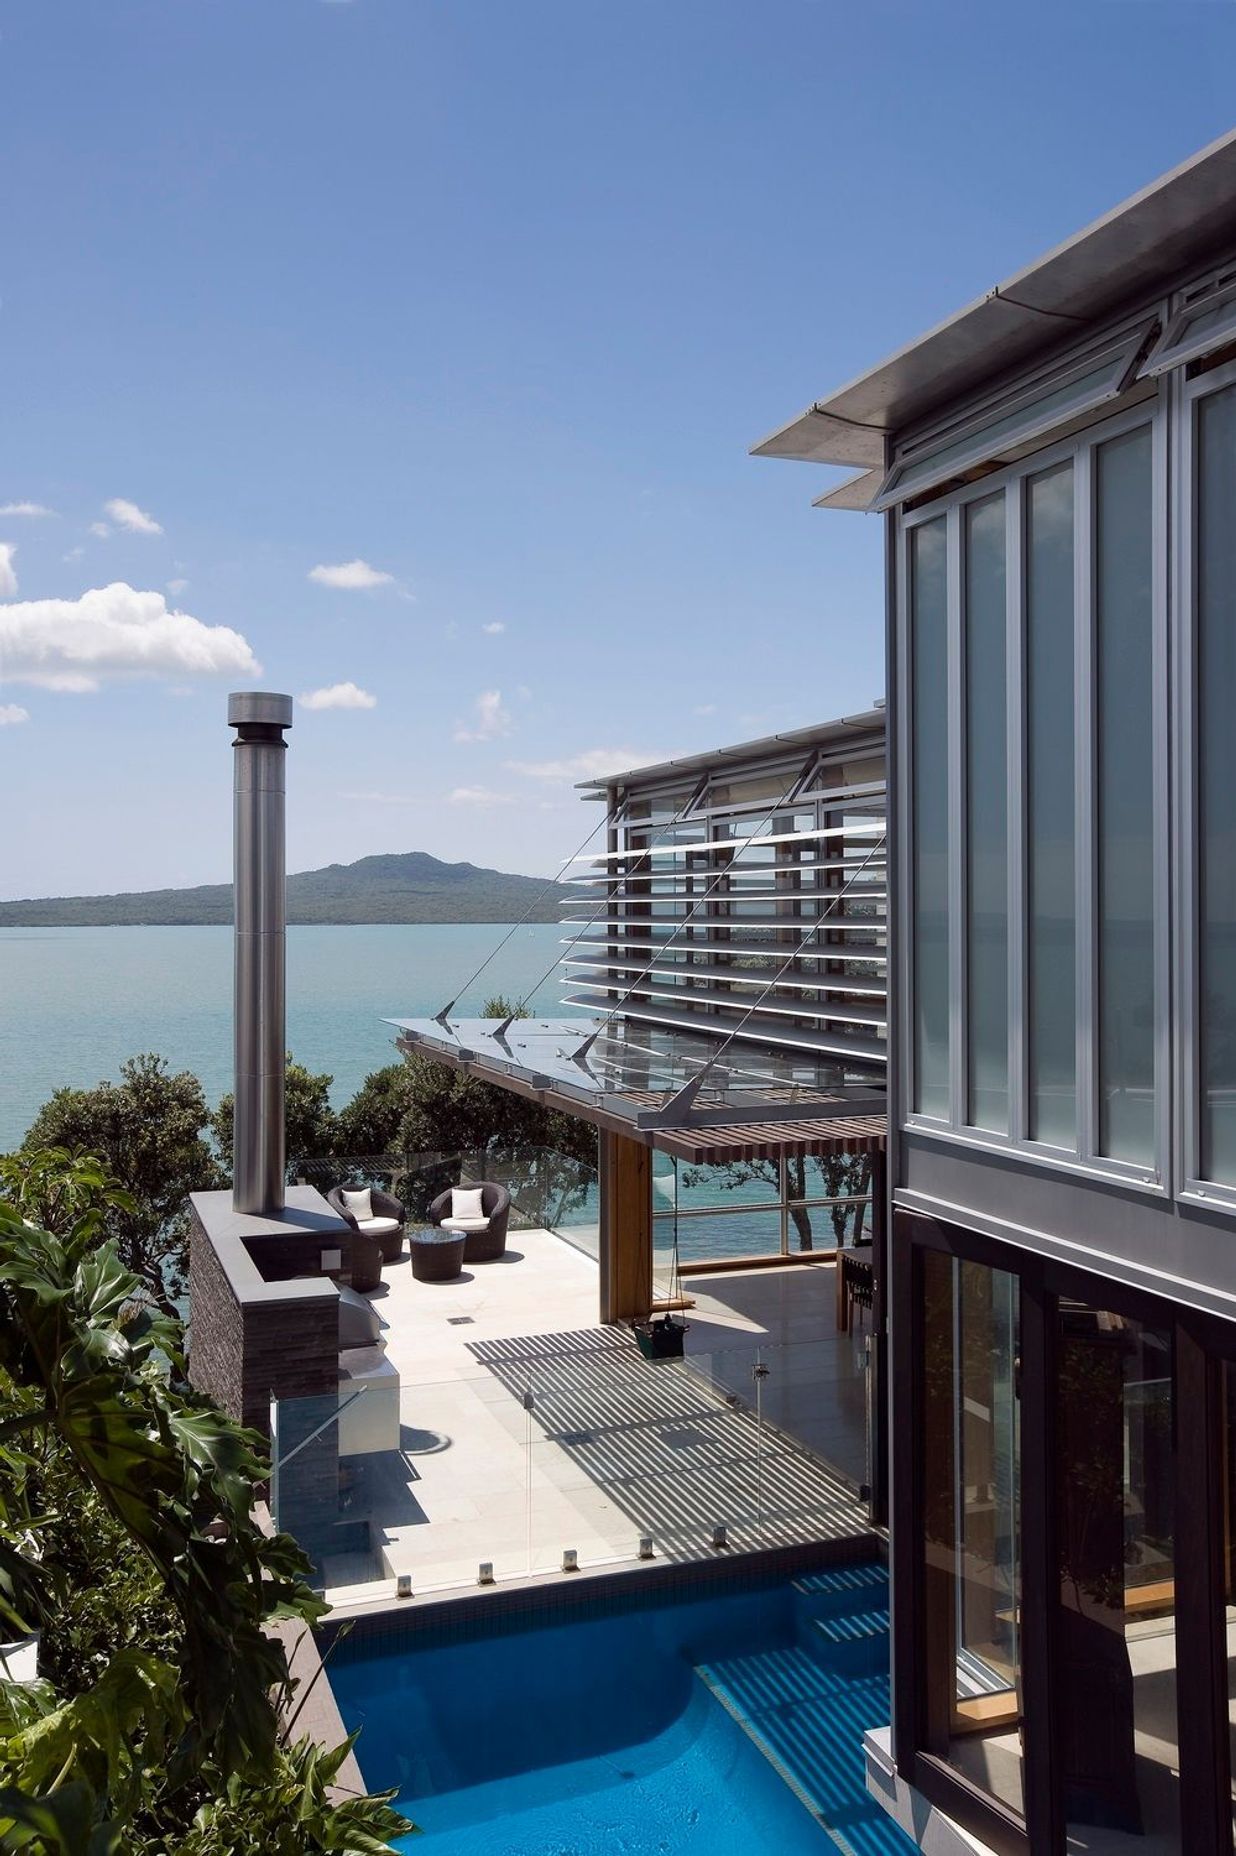 NORTH SHORE HOUSE, AUCKLAND